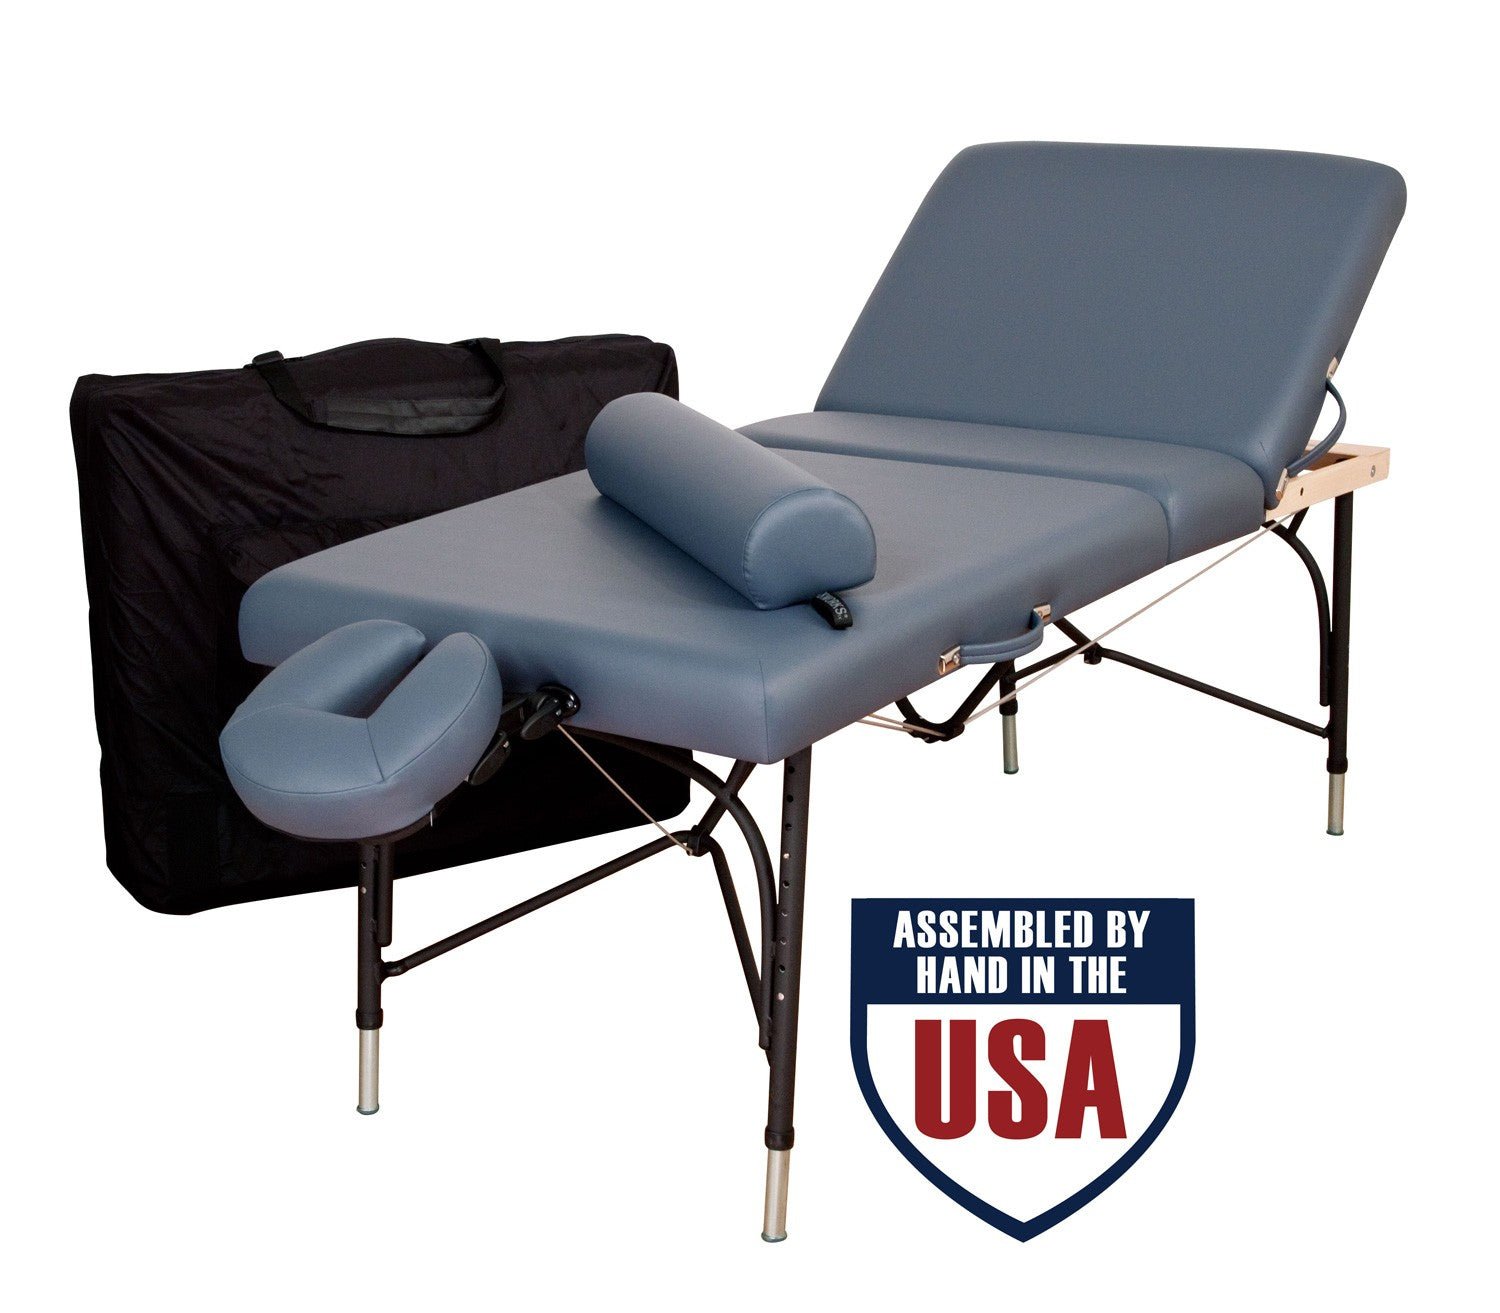 Tables: Portable Lift Back Tables - ibodycare